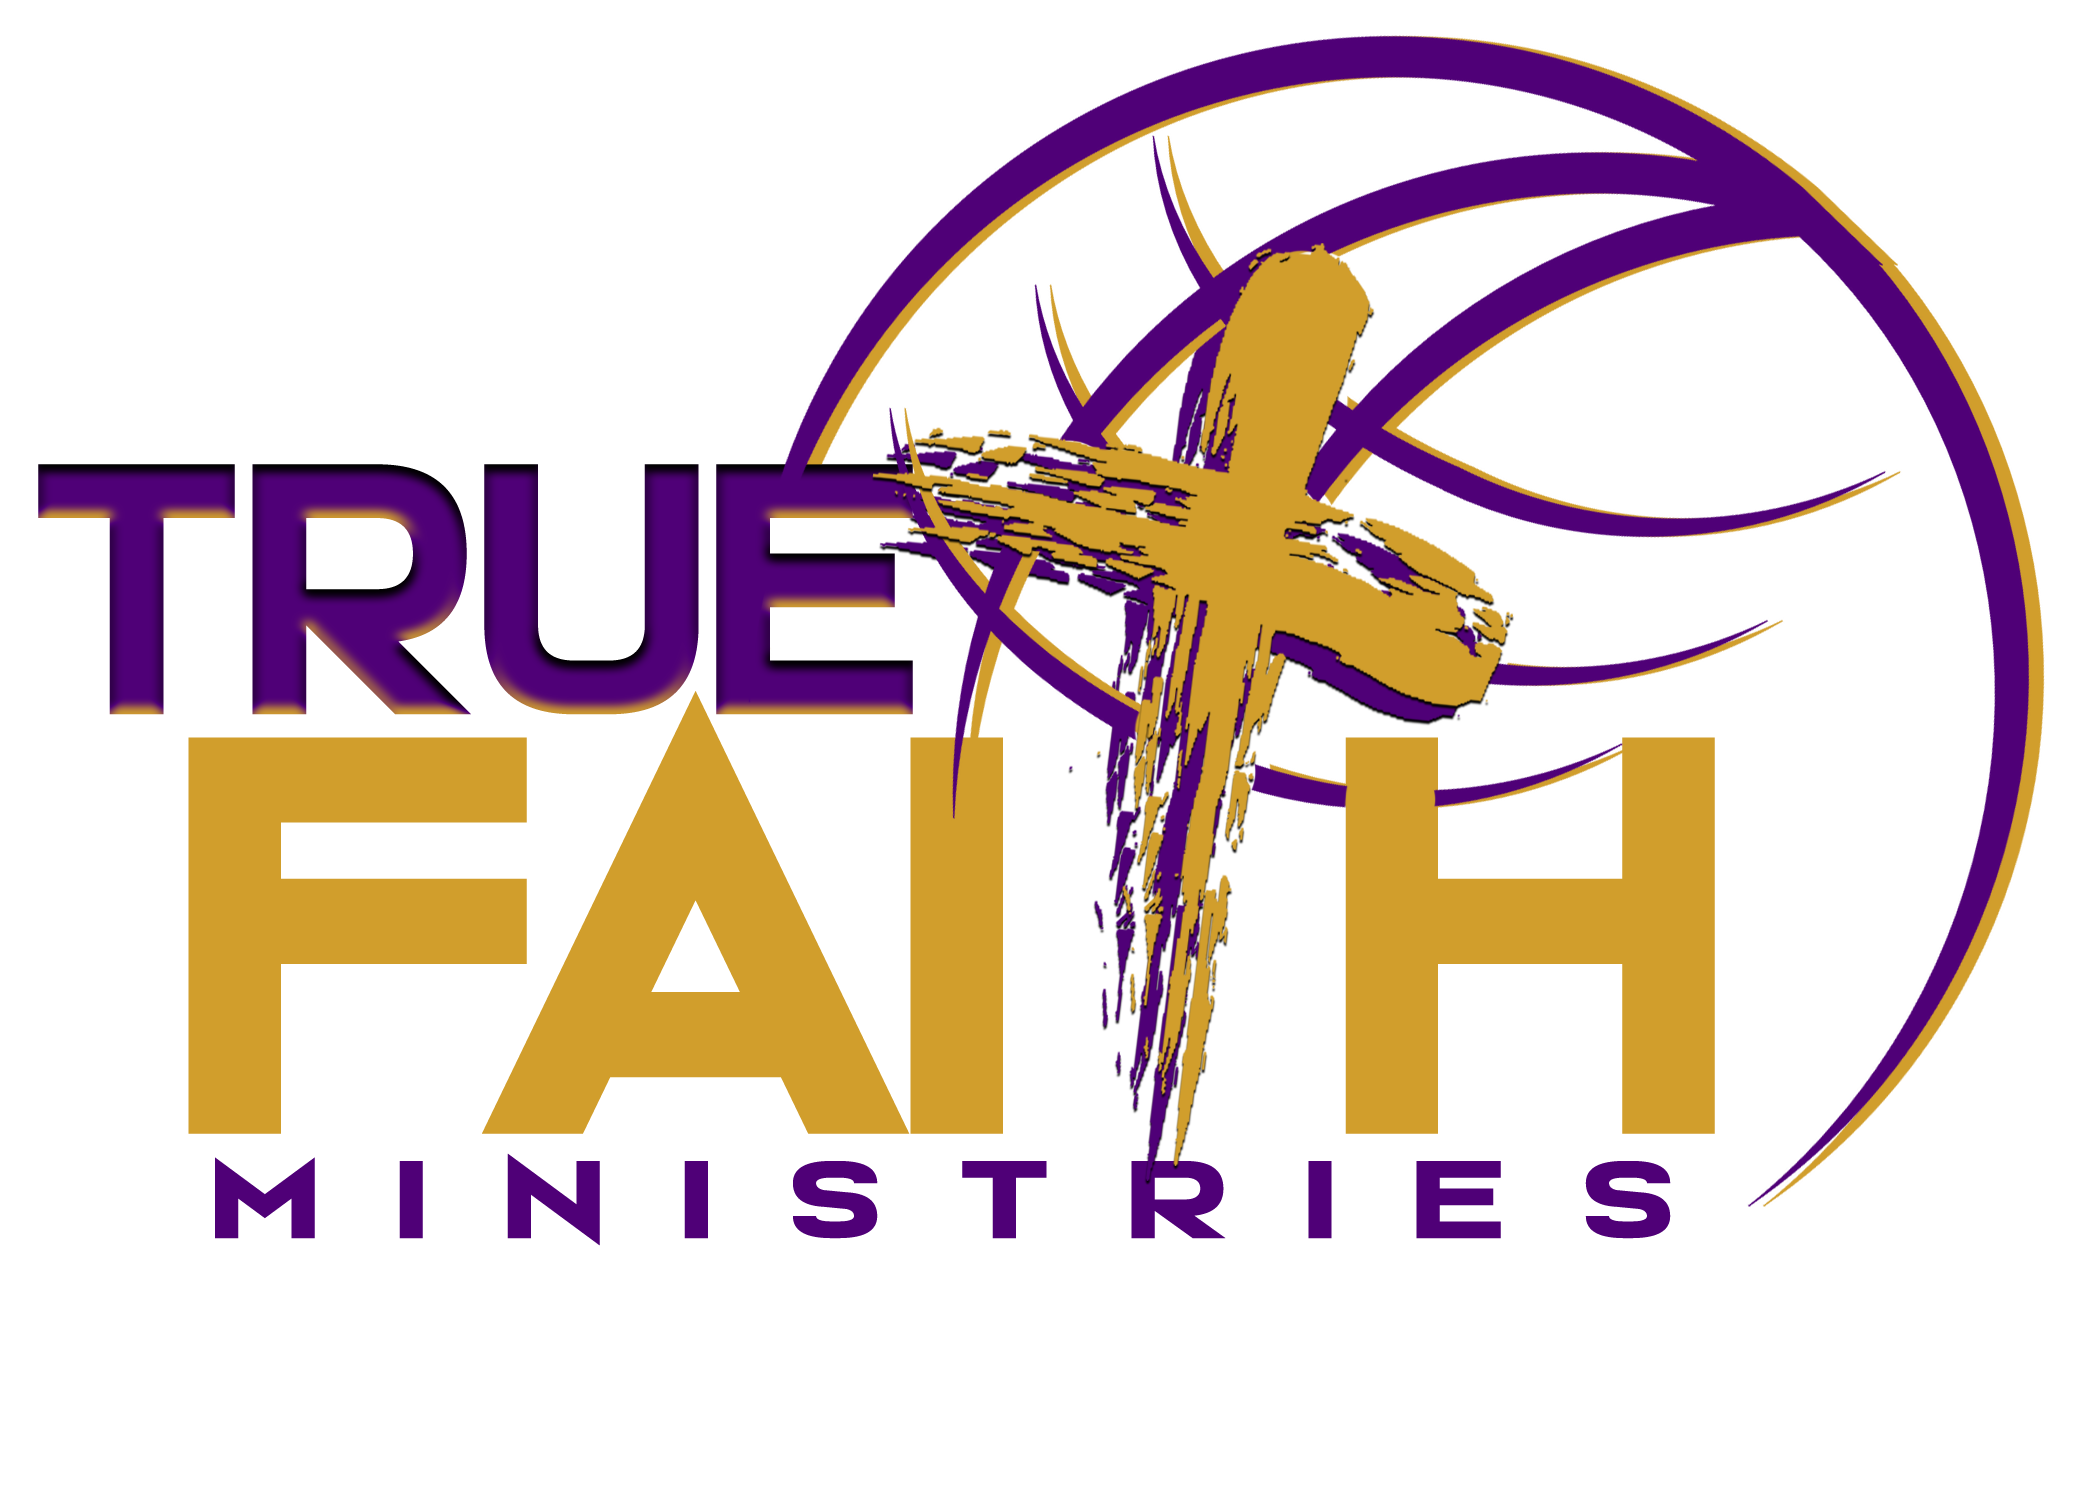 TFM Sunday Service - Welcome to TFM Online Experience church online for powerful preaching  worship with Bishop C W Orr. TFM is making a difference. Building relationships and spreading Hope.